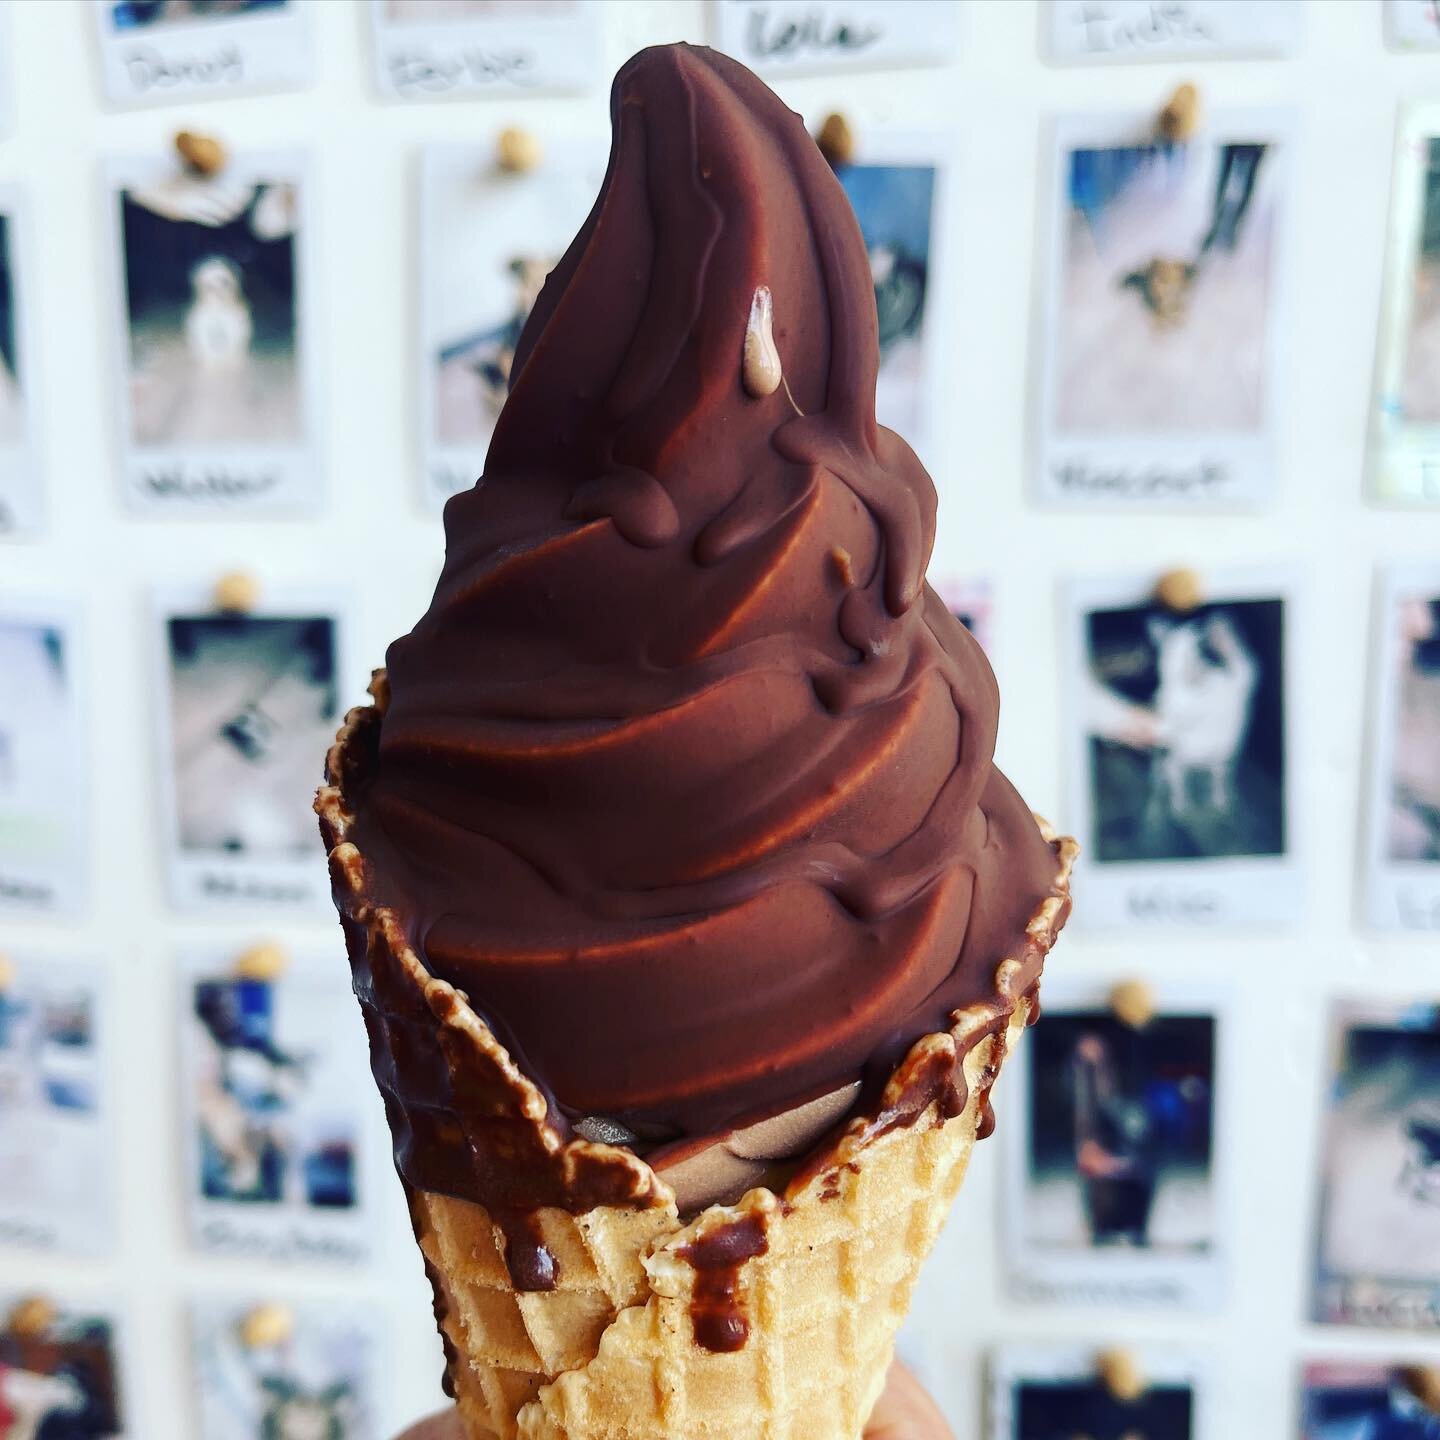 The double down. Chocolate ice cream dipped in Ghirardelli chocolate in our mini waffle cone 🍫🍫🍫🍫🍦🔥😋

#icecream #dessert #sdfoodie #sdeats #sdfoodscene #northparksd #familyowned #sdsmallbusiness #explorenorthpark #exploresandiego #softserve #o